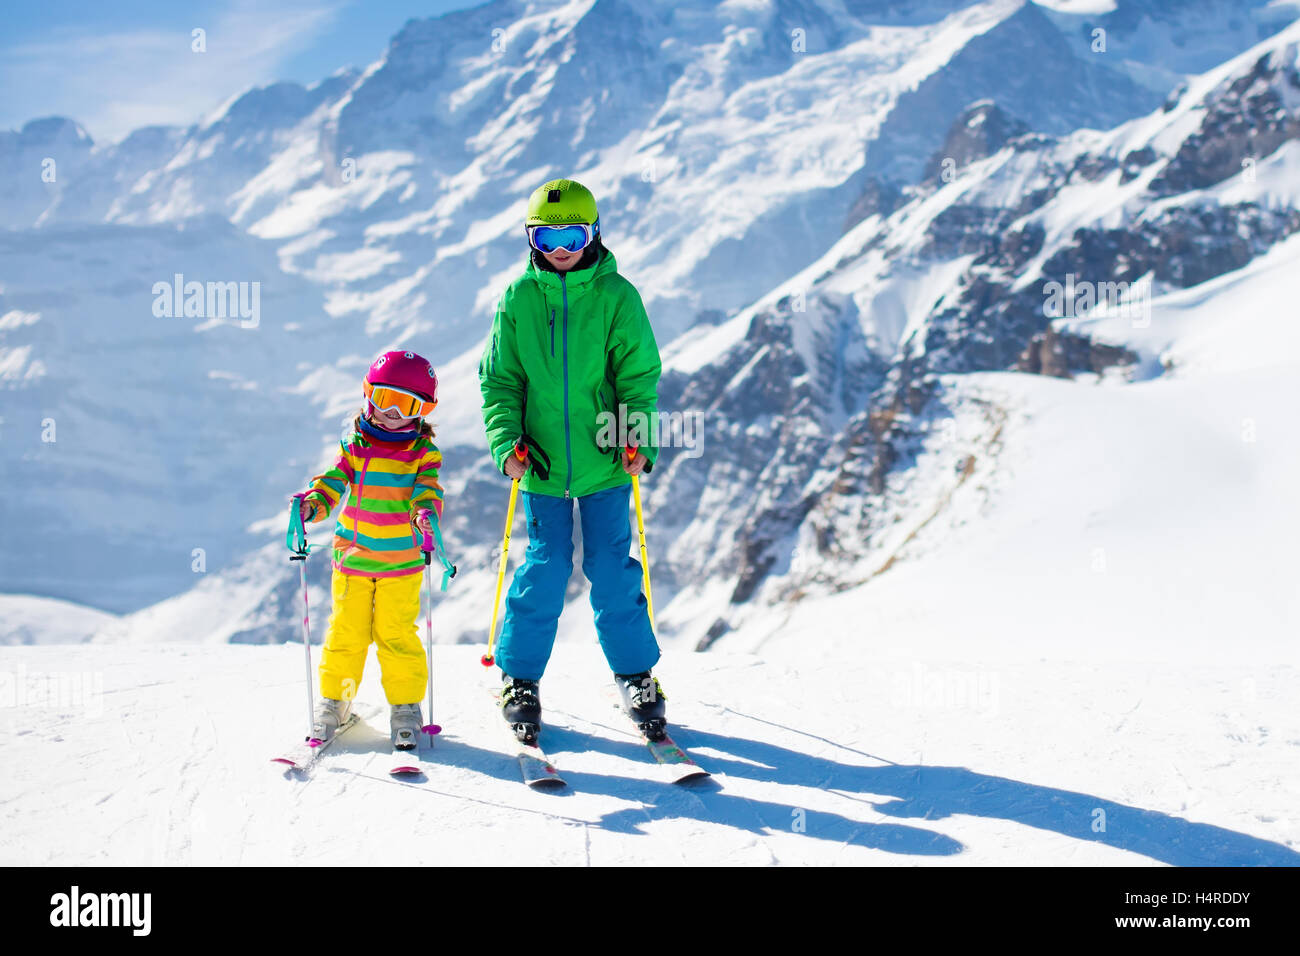 Kids skiing in mountains. Active children with safety helmet, goggles and poles. Ski race for young kids. Winter sport Stock Photo